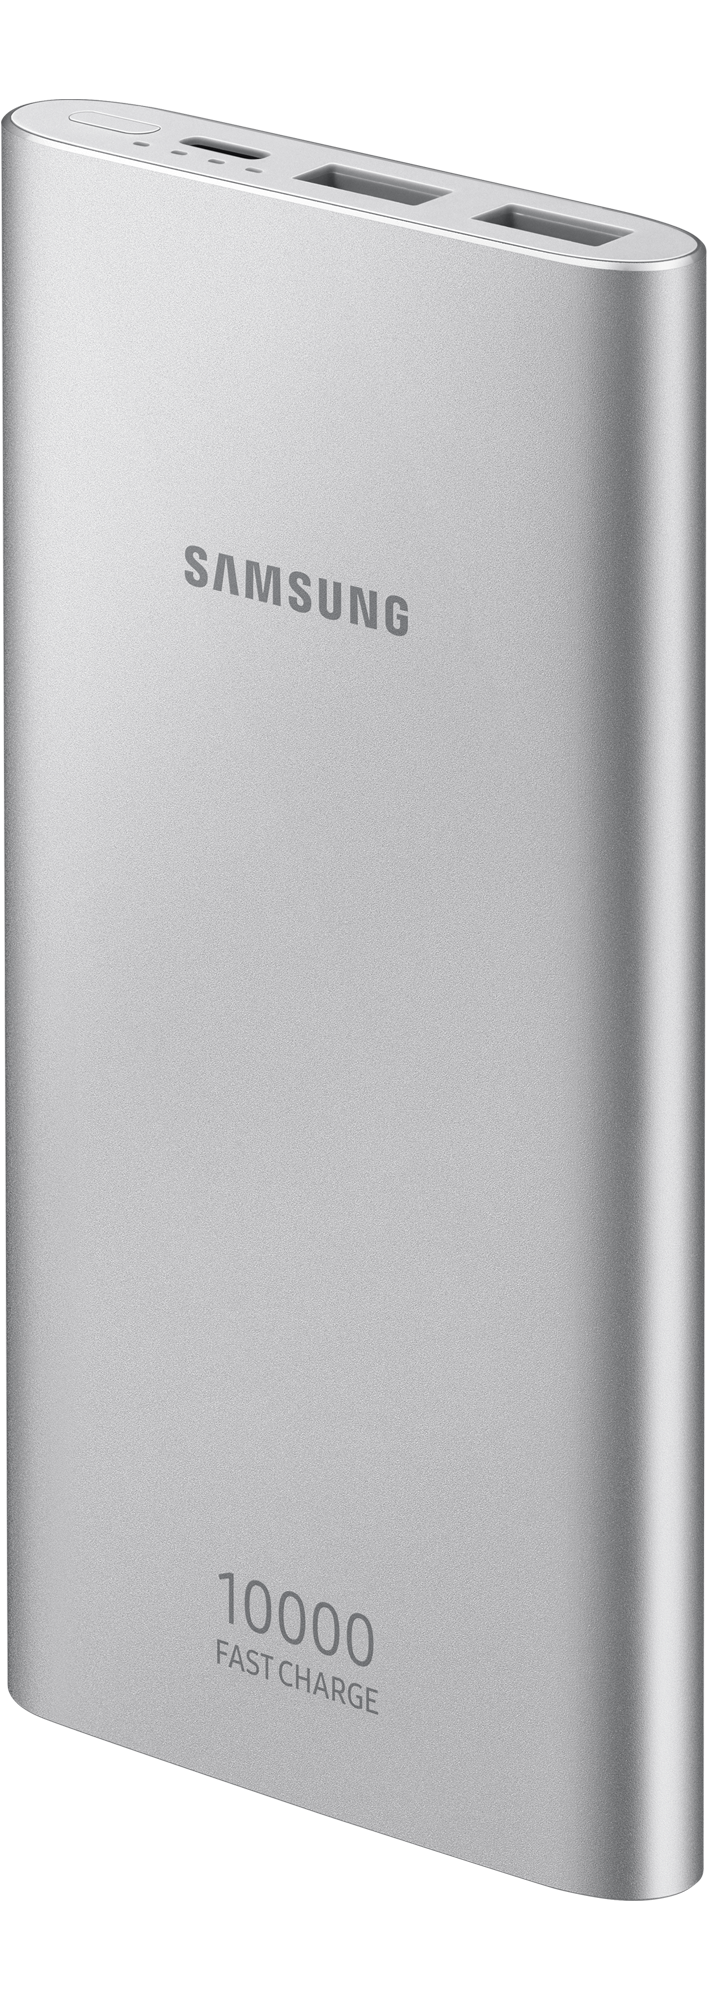 SAMSUNG 10 000Mah Ultra Battery Pack (Inc. Type C Cable) Silver